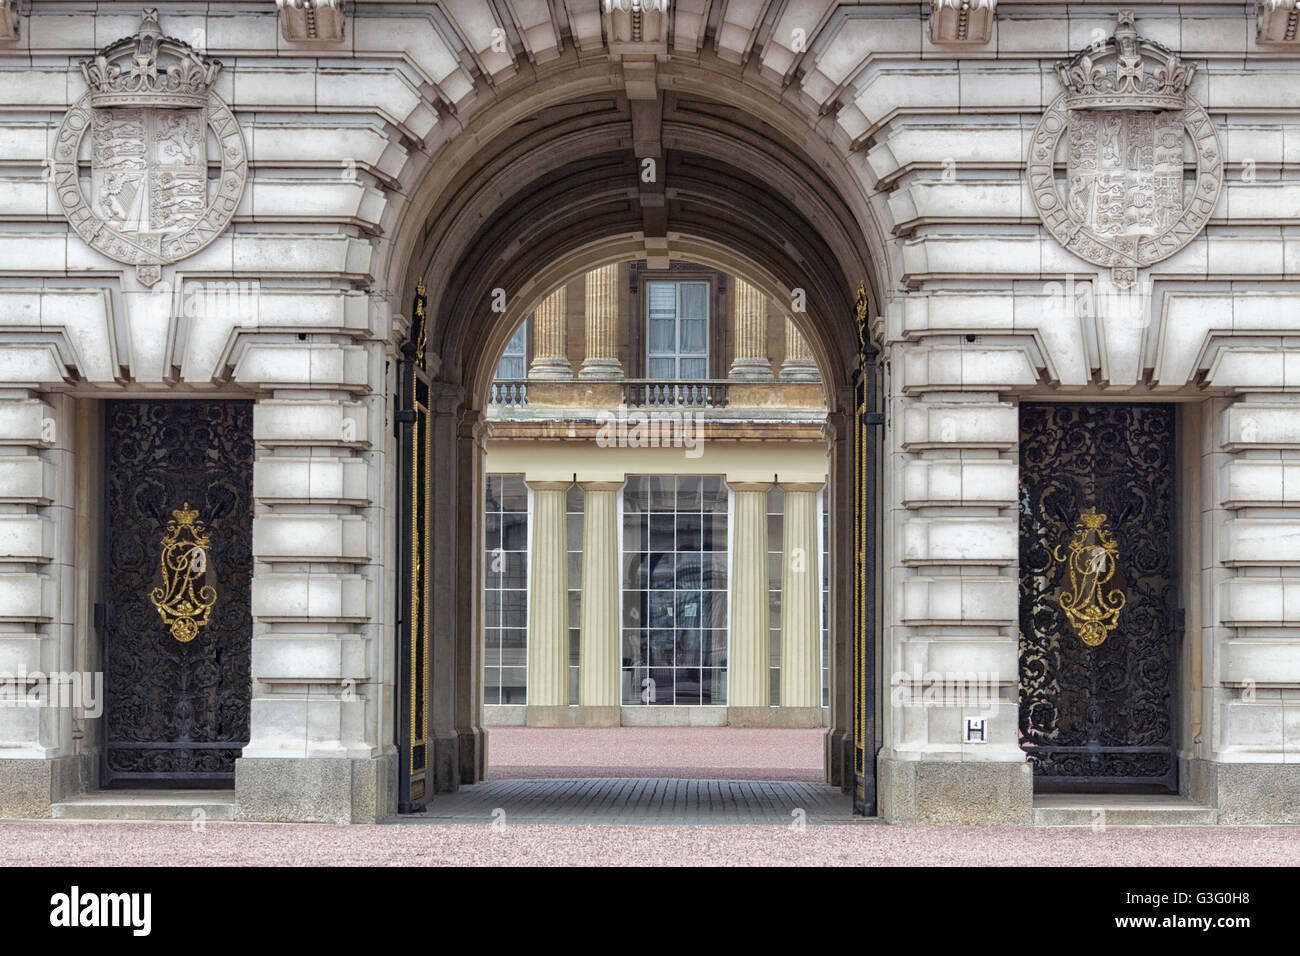 Buckingham Palace the official London residence and principal workplace of the British monarch Stock Photo